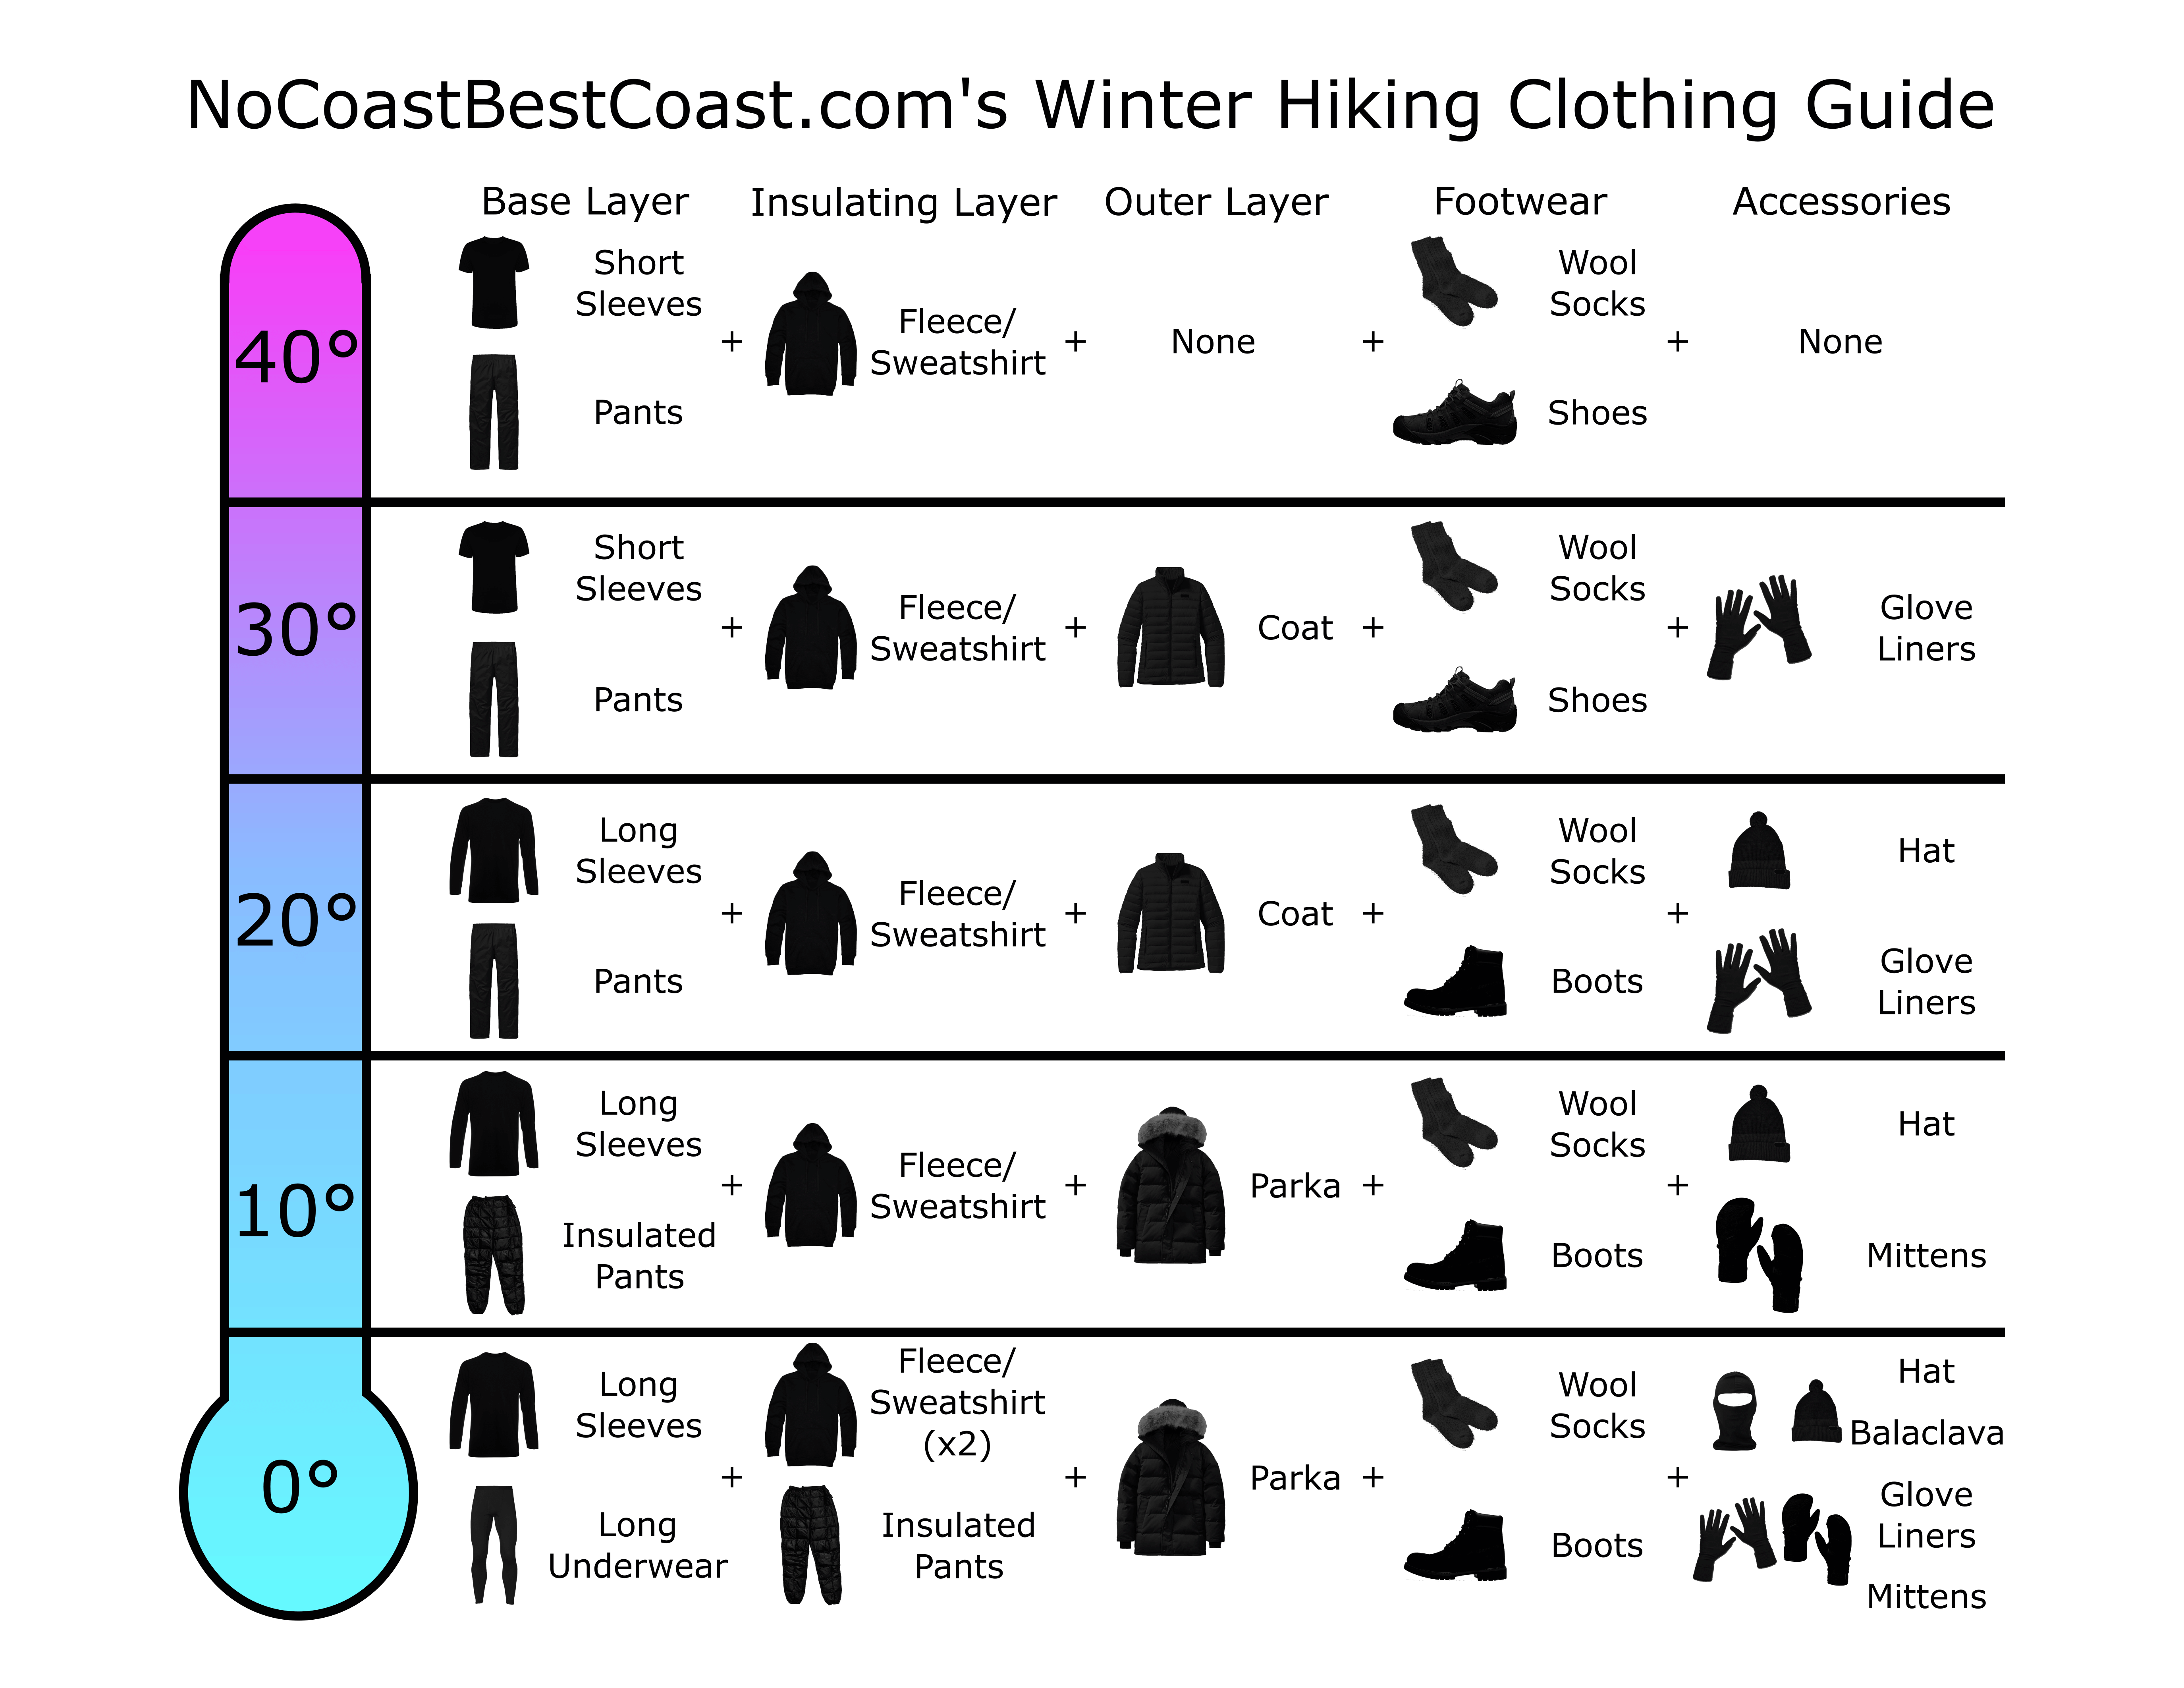 How to Dress Warm - WINTER FISHING CLOTHING - What to Wear 4 Outdoor  Activities 